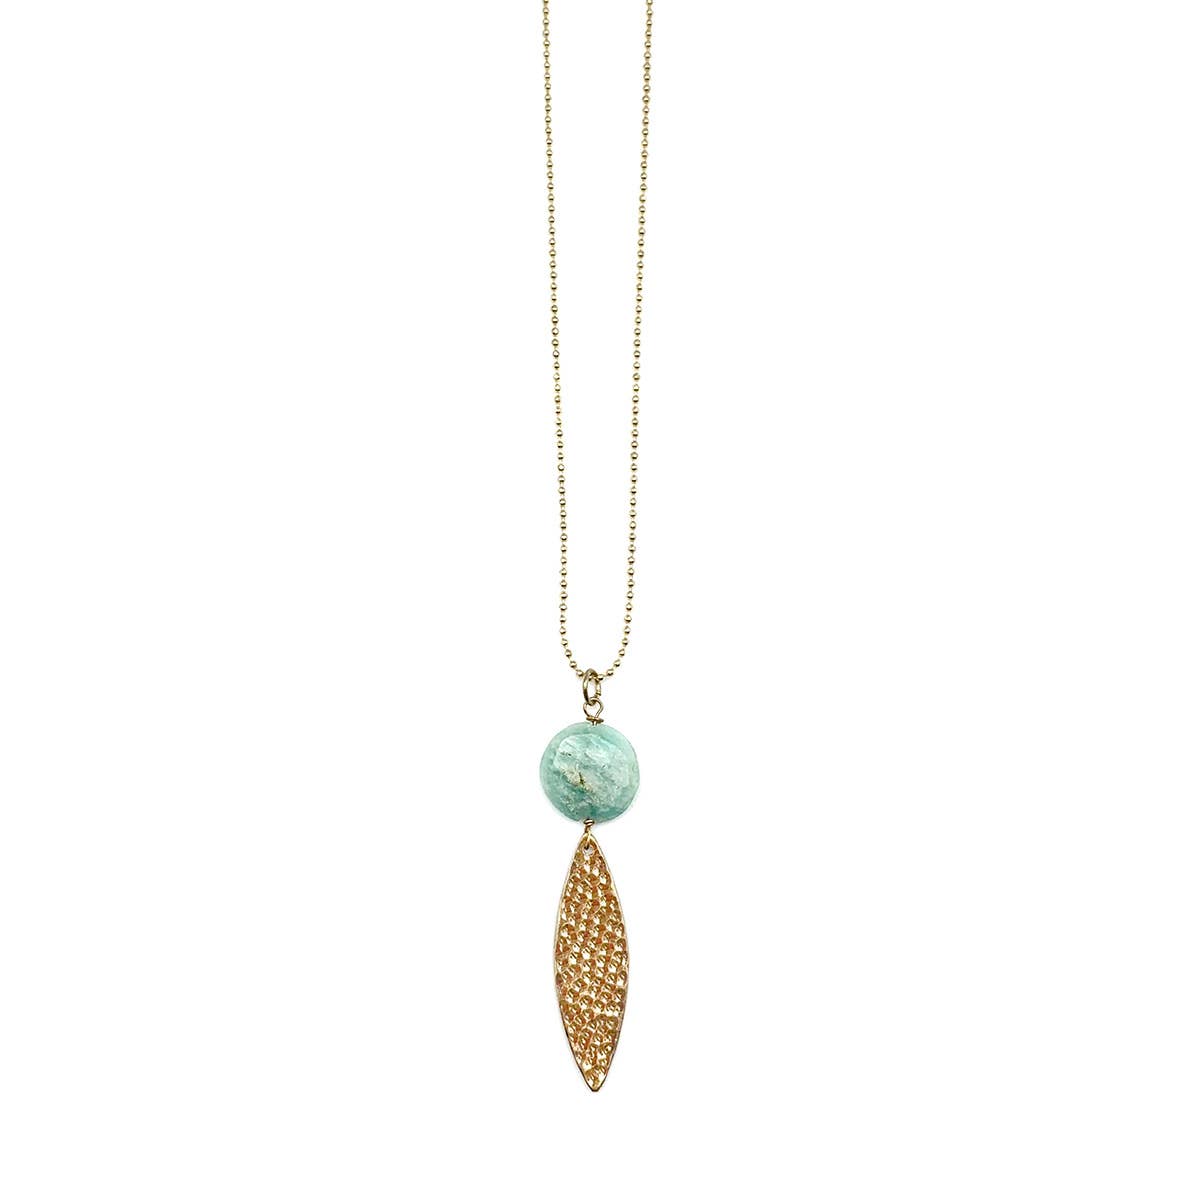 Akriti Gold and Medium Faceted Amazonite Necklace